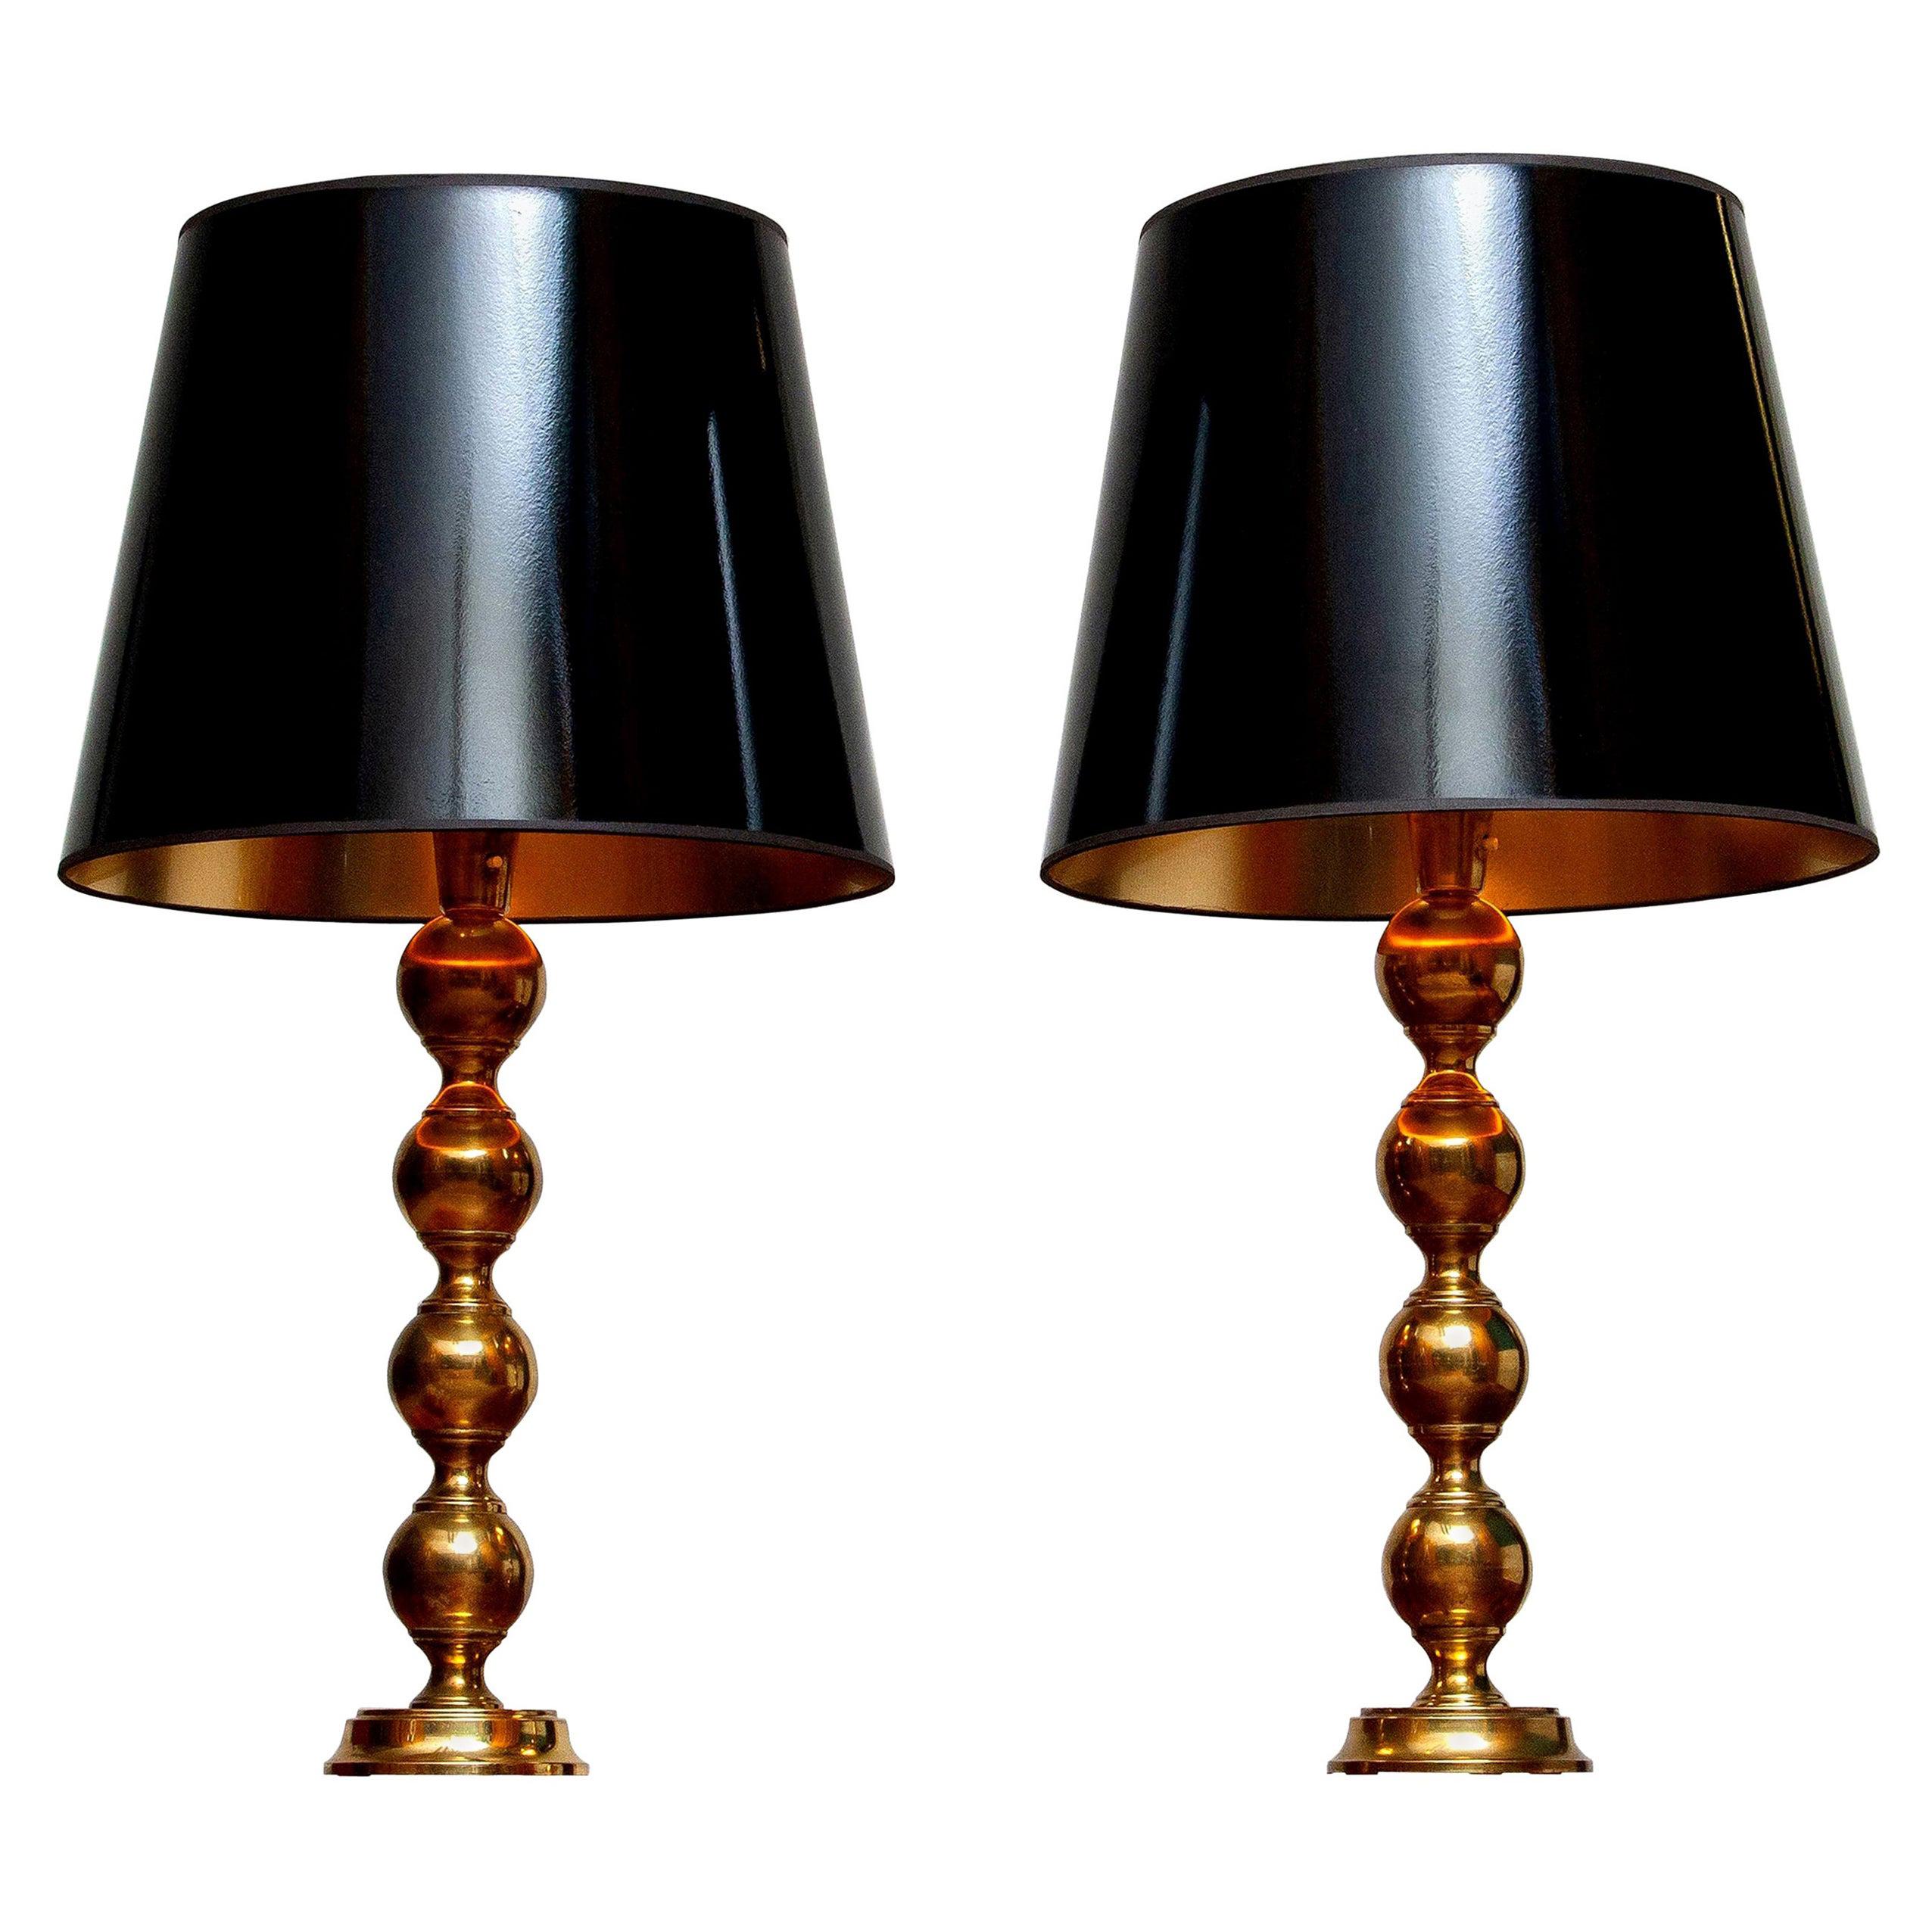 These beautiful extra large brass 1950s spherical table lamps are extremely rare and in great condition.
Suits 110 / 230 volts and have both one E27 / 28 bulb with switch. Technically 100%
The brass Stand alone is 20 inches in height. Together